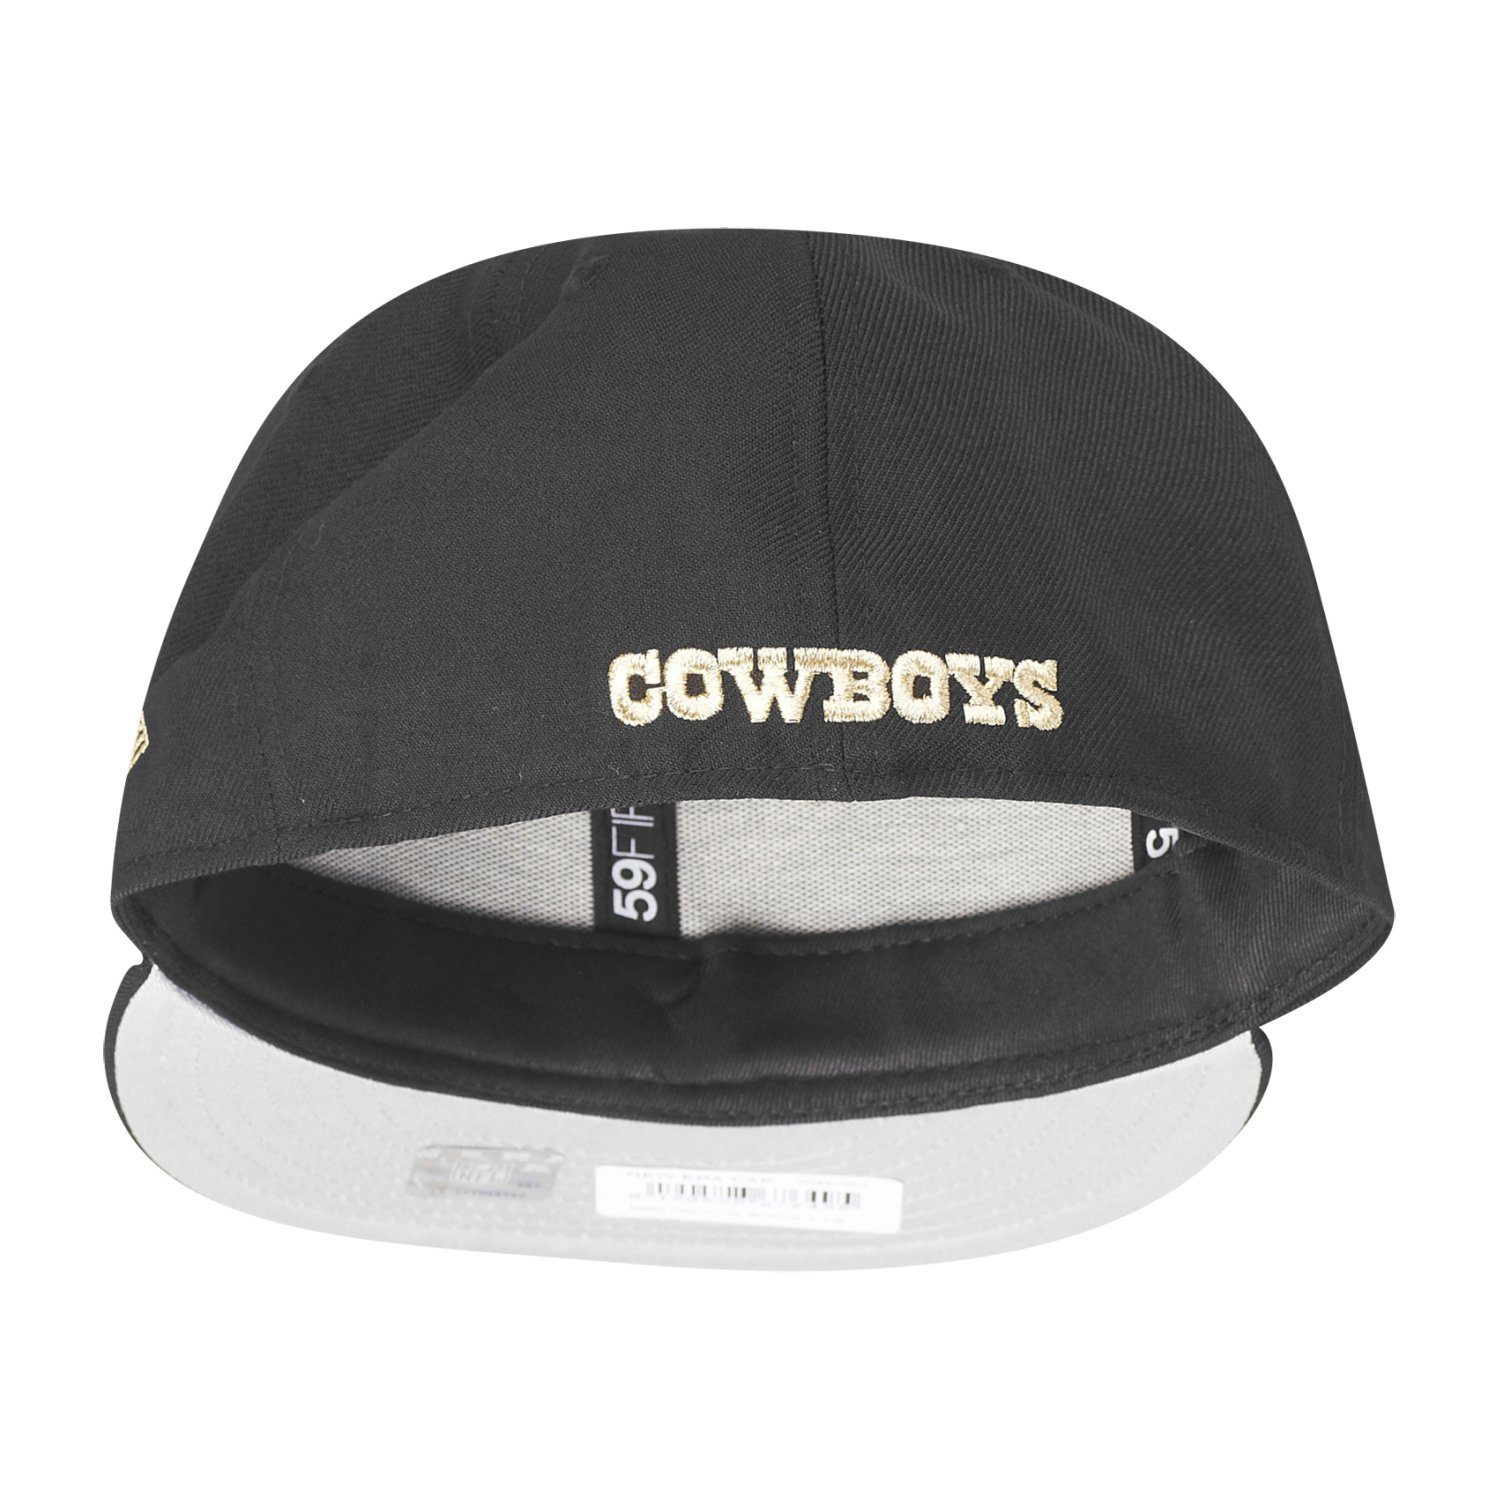 Era Fitted New gold 59Fifty Dallas Cap Cowboys